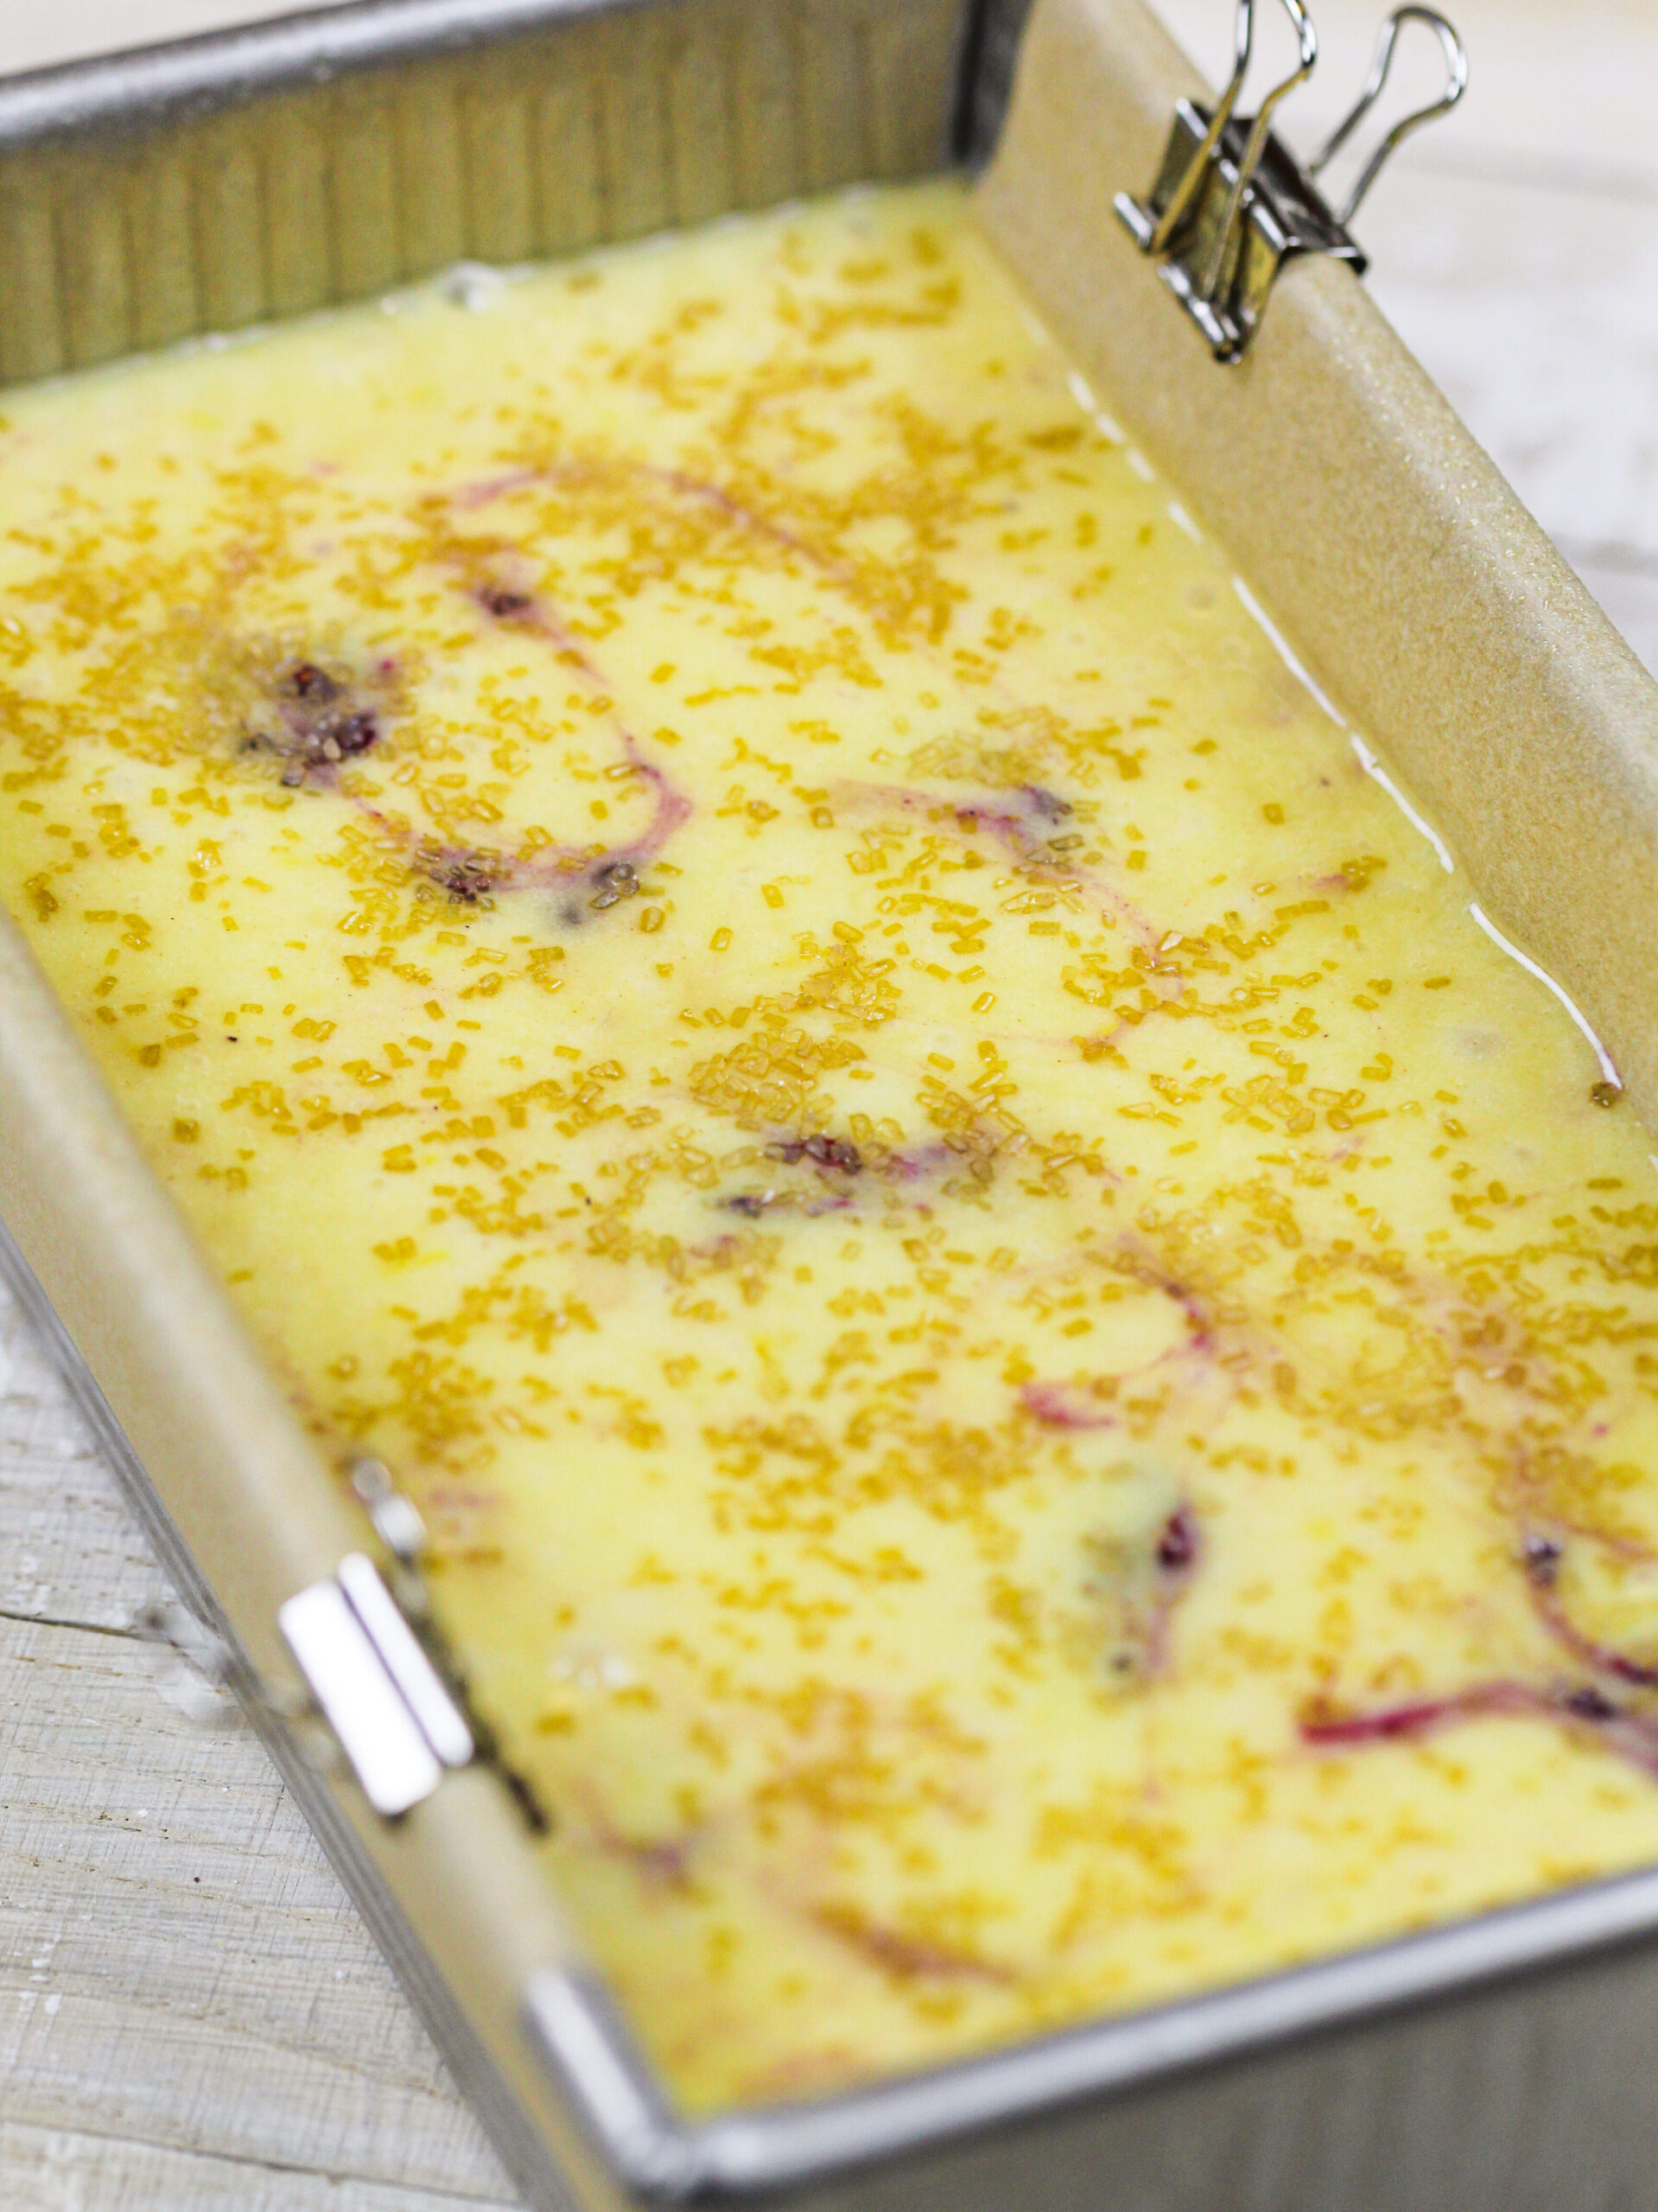 image of blackberry lemon bread batter in a loaf pan ready to be baked and topped with a sprinkle of turbinado sugar for a bit of extra texture